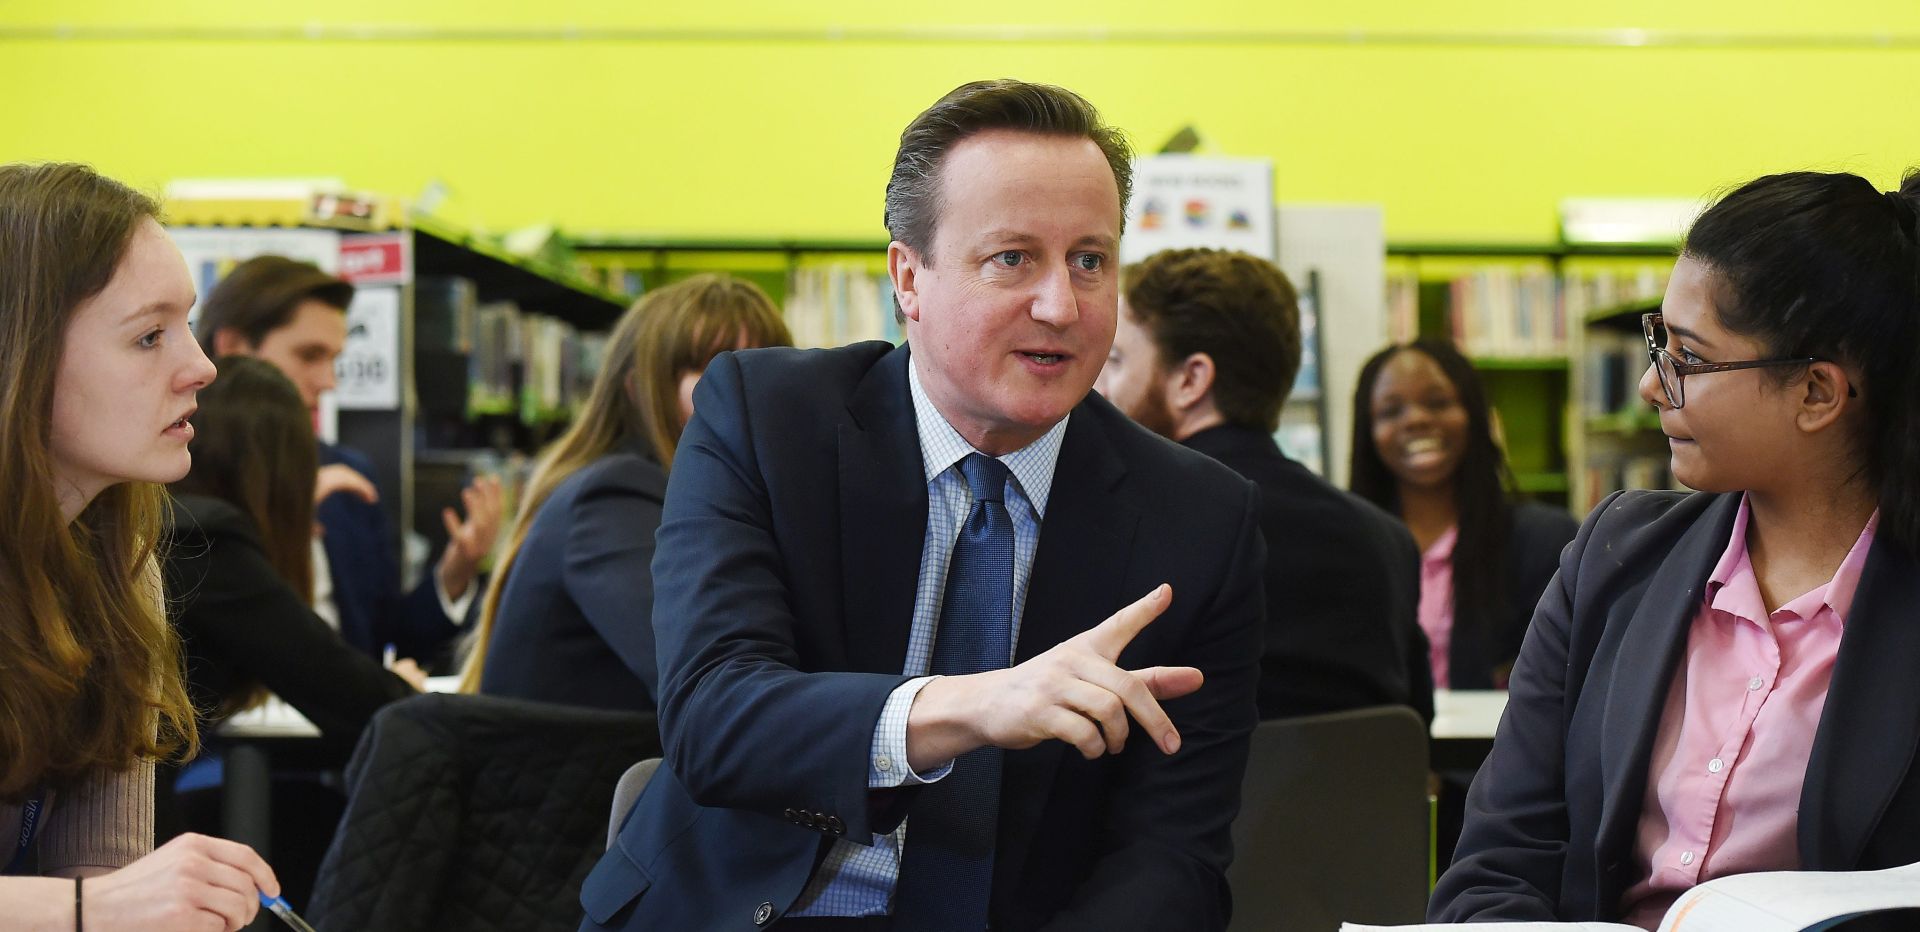 epa05211031 British Prime Minister David Cameron meets with school children at the Harris Academy school in London, Britain, 14 March 2016. This week marks national apprenticeship week.  EPA/ANDY RAIN / POOL